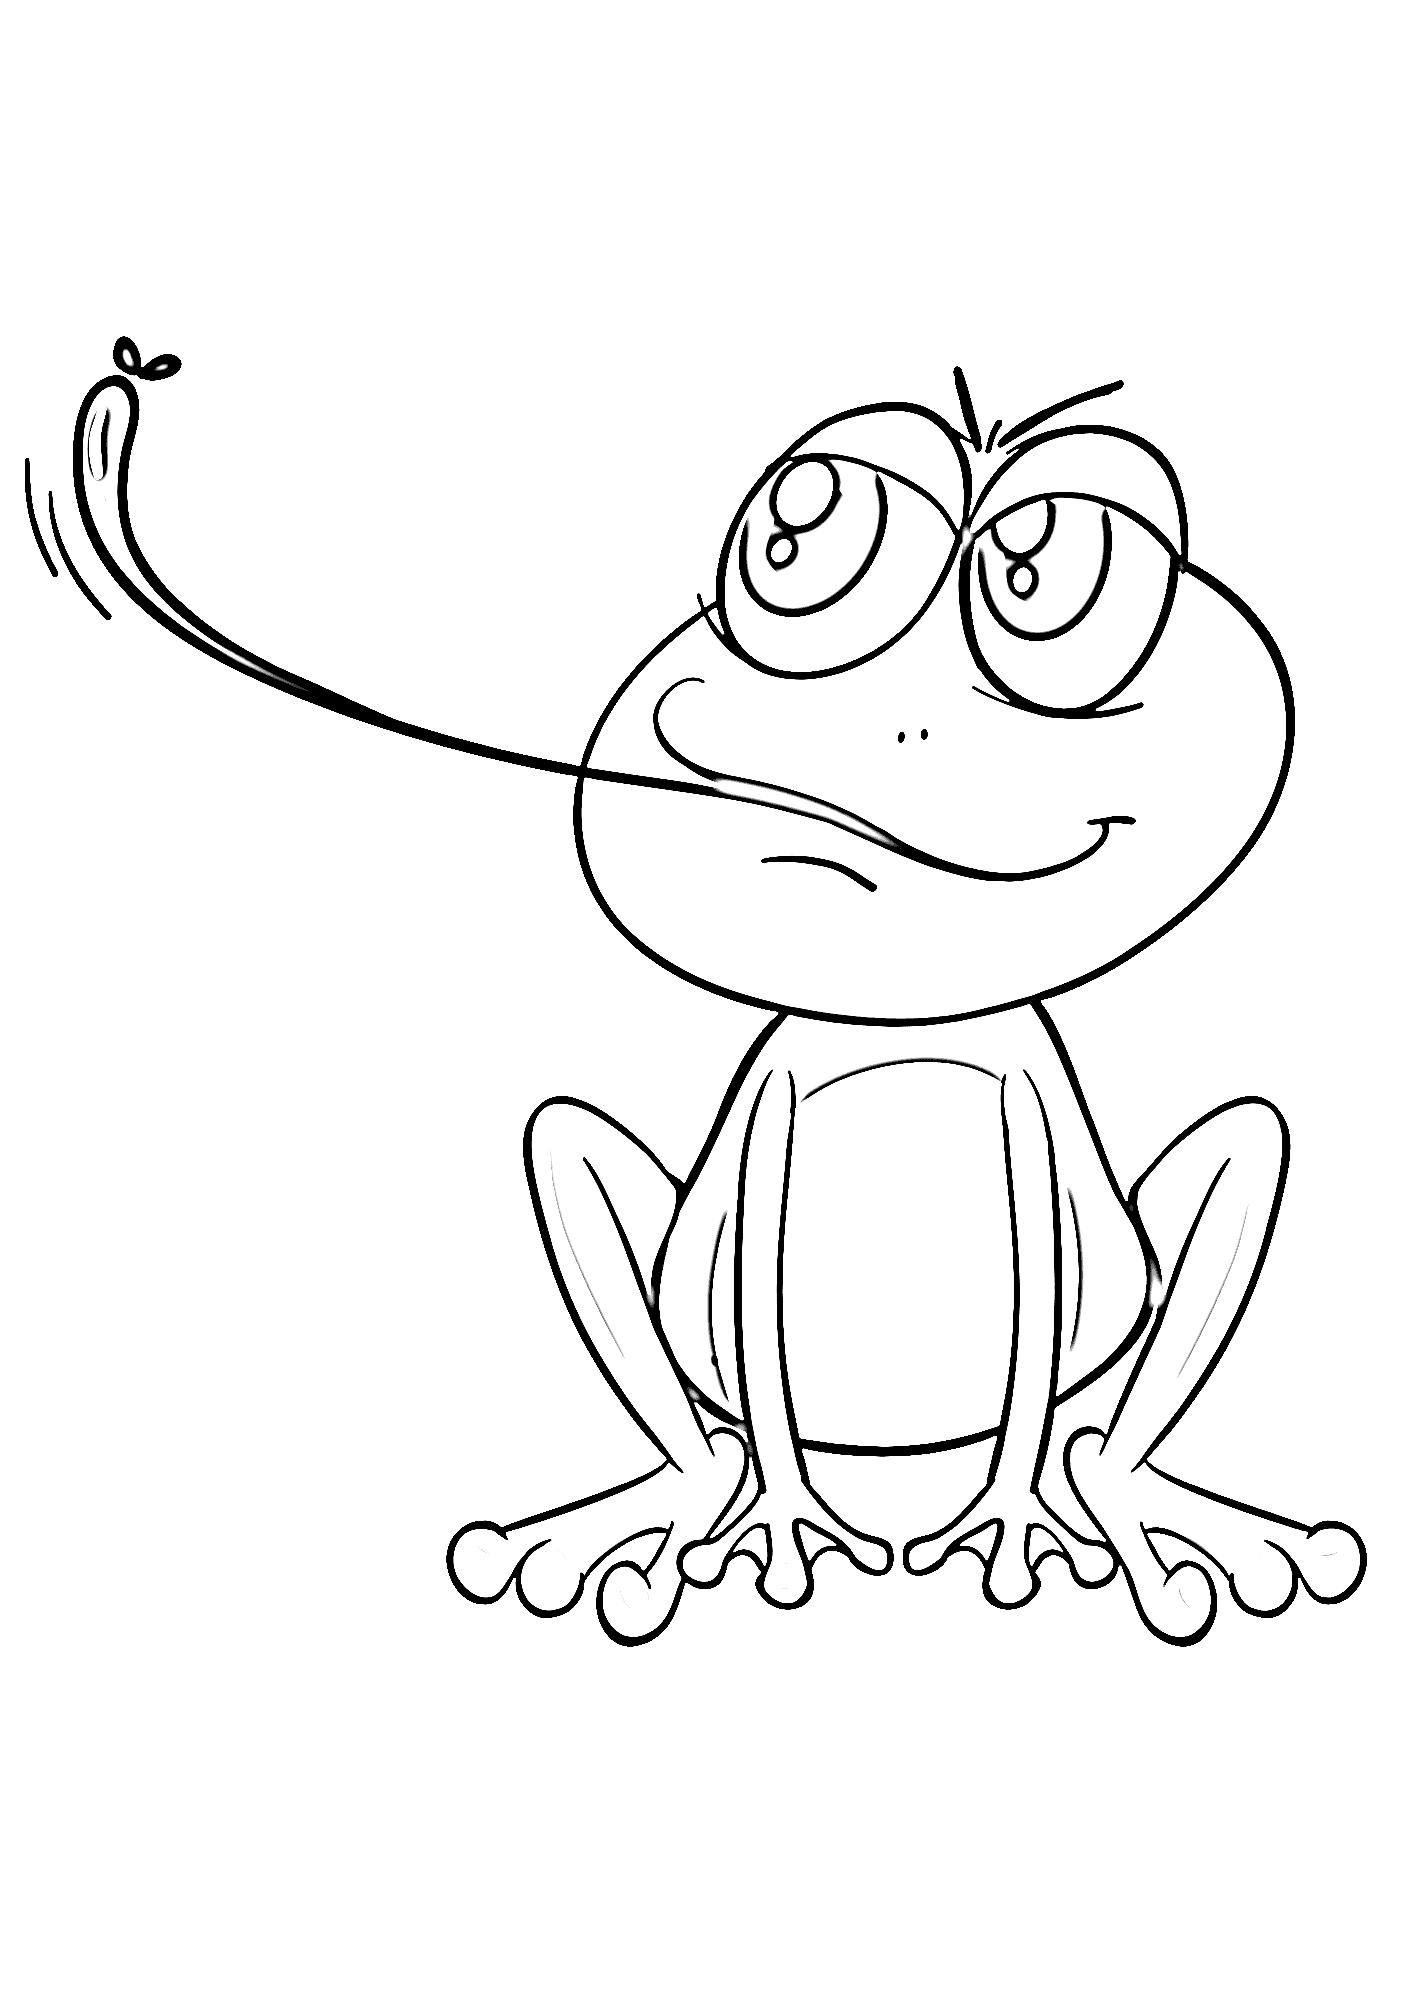 Frog Eating Fly Coloring Page